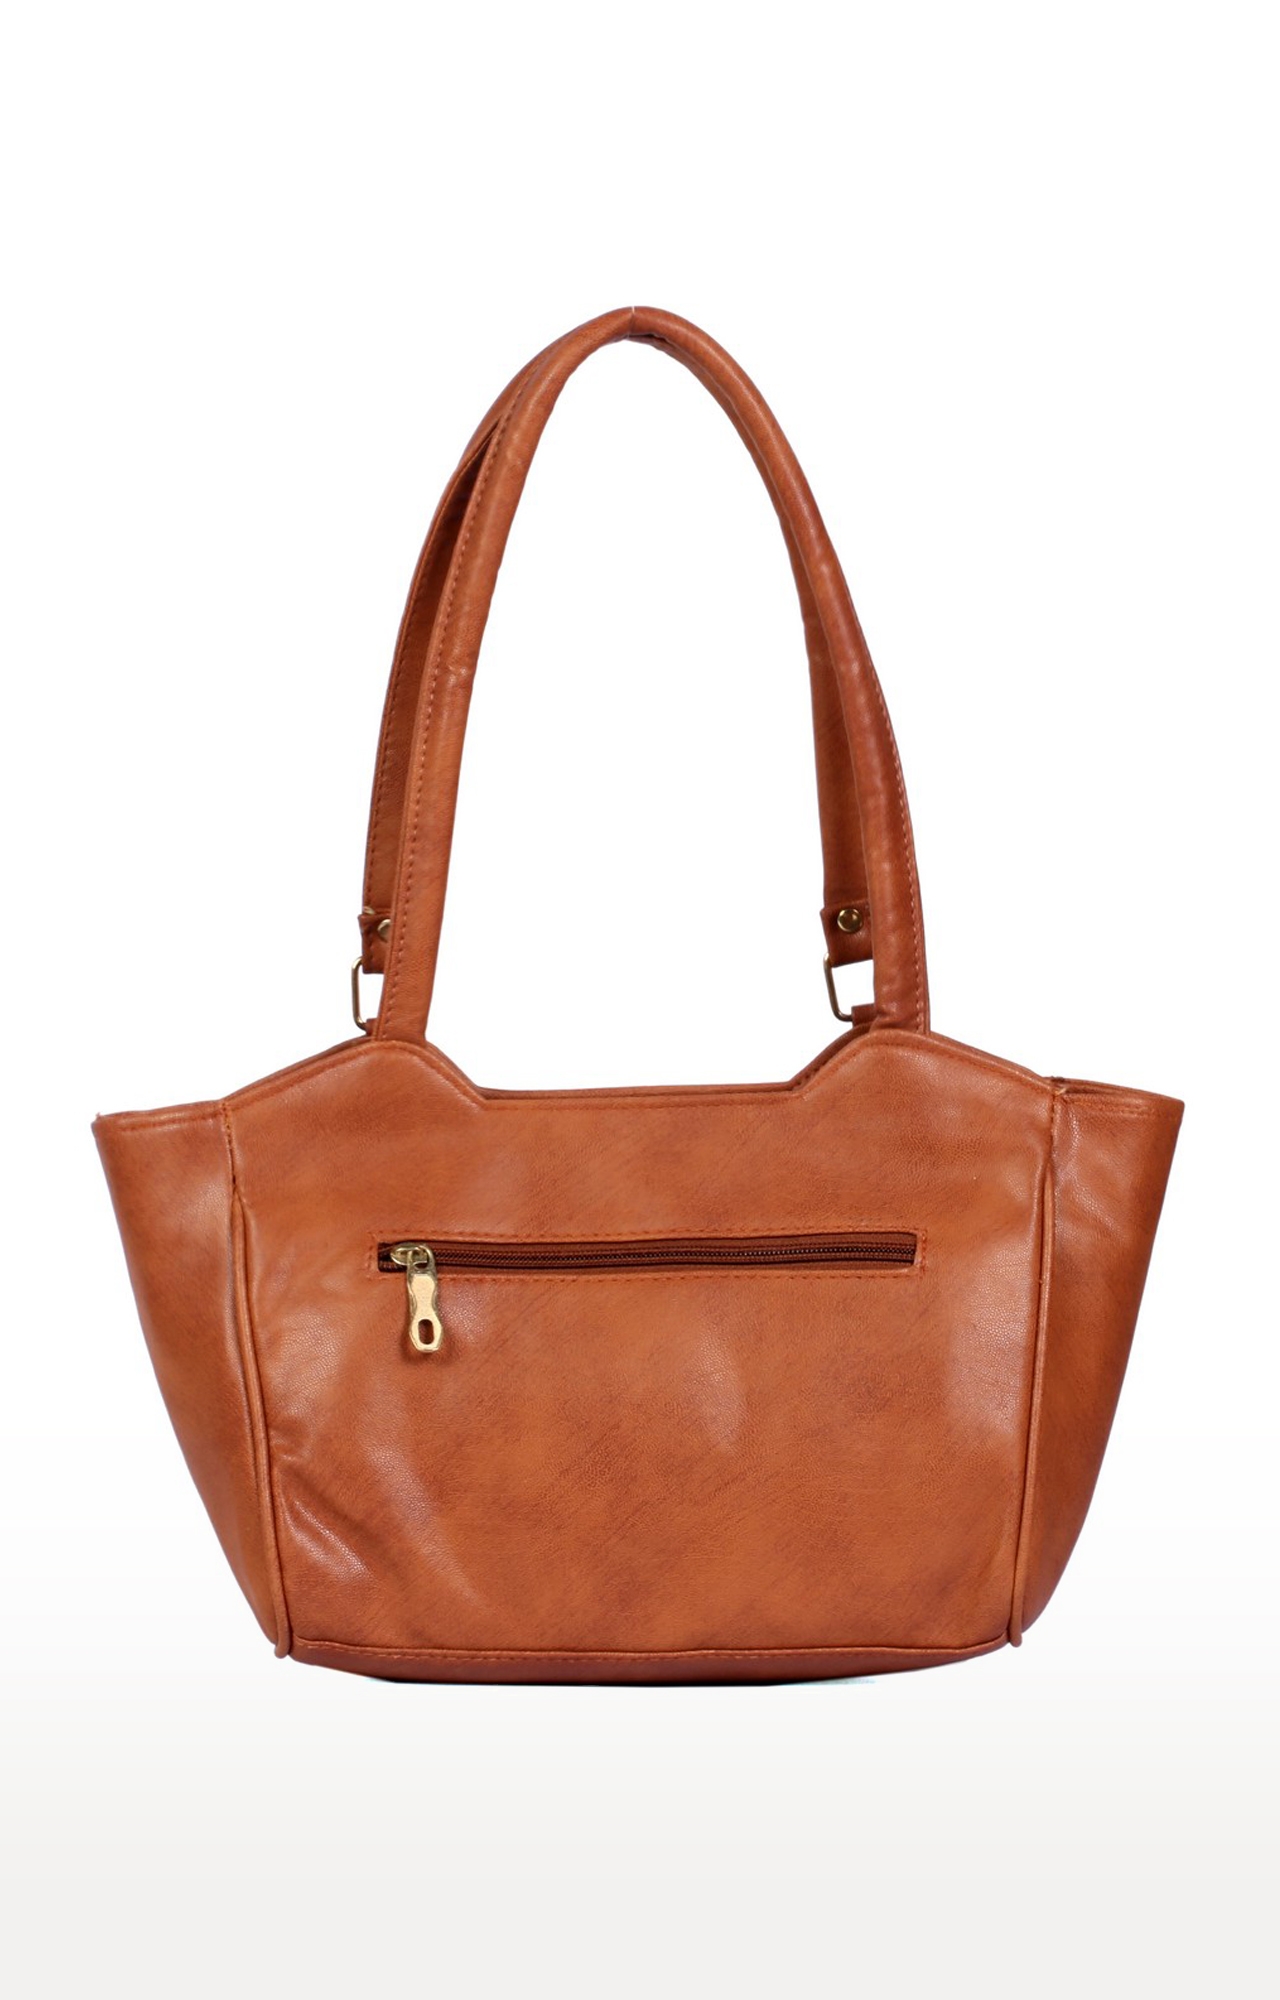 EMM | Lely's Beautiful Women's Handbag With Latest Shades -Brown 1